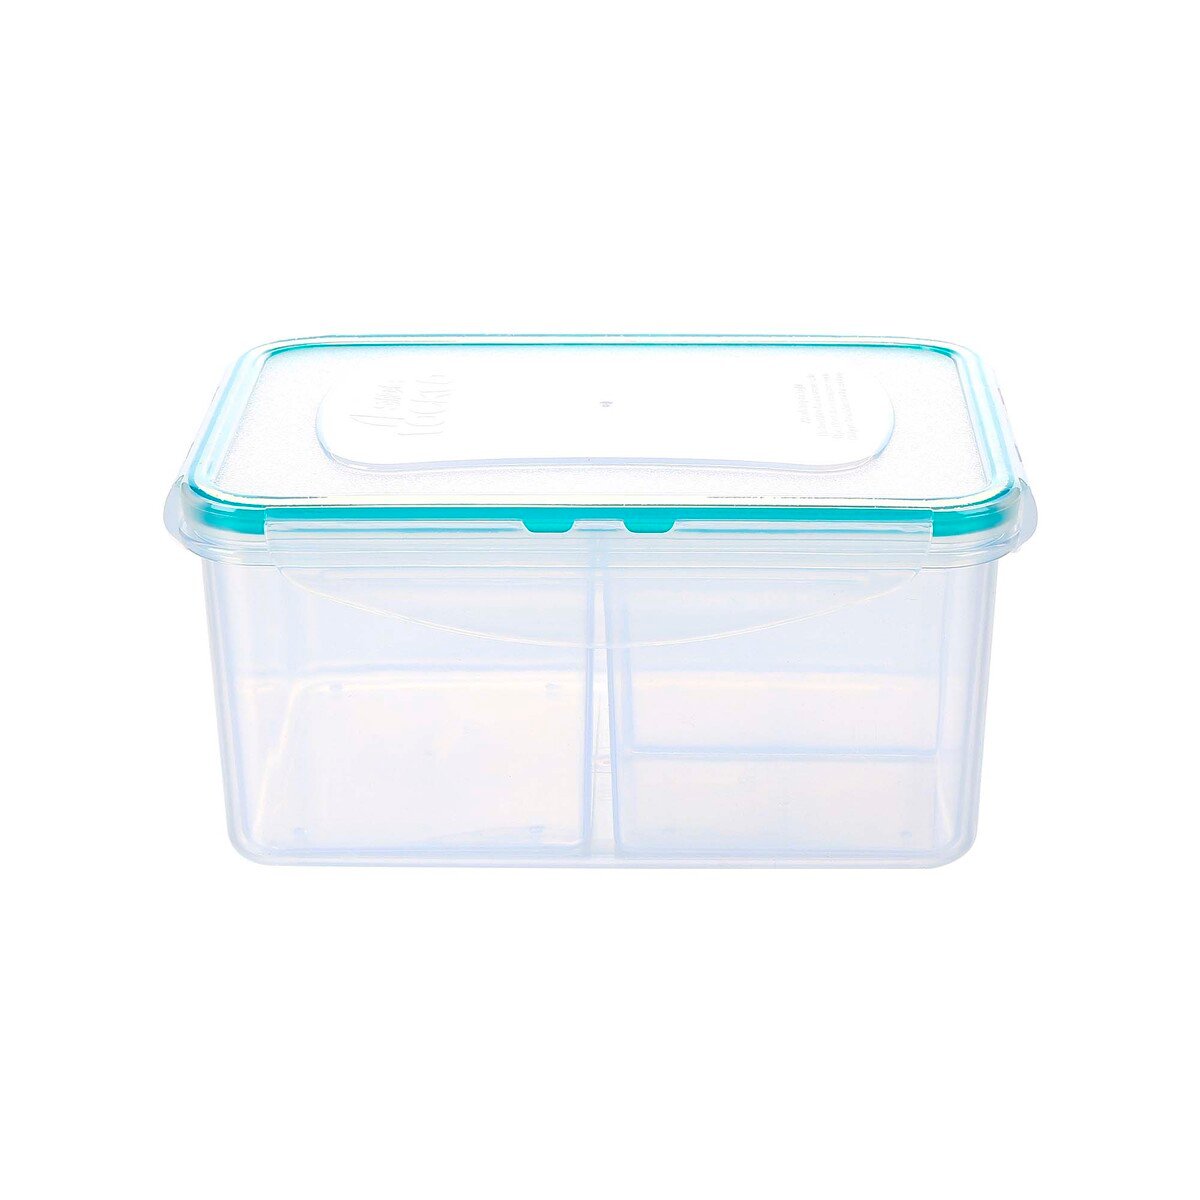 4 Side Locked Container, Transparent, CP042P